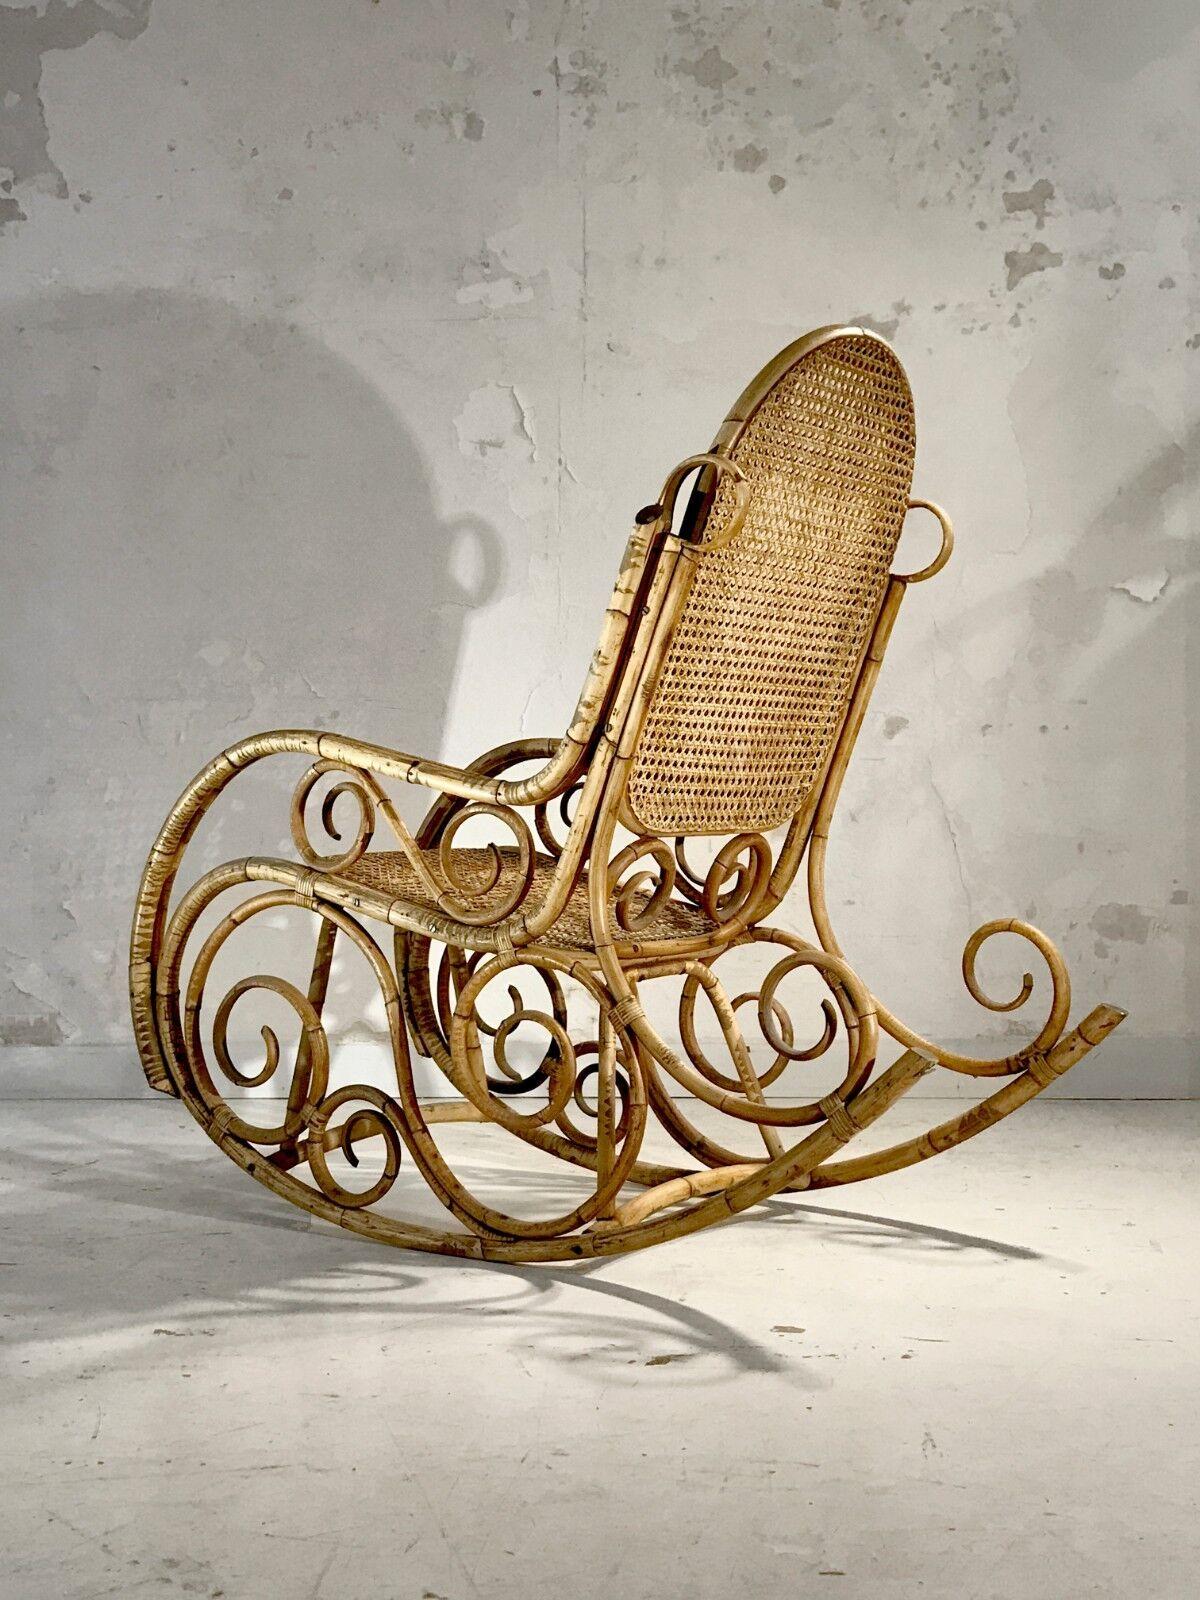 Bamboo An Early MODERN NEO-CLASSICAL FREE-FORM ROCKING-CHAIR by THONET, France 1900 For Sale